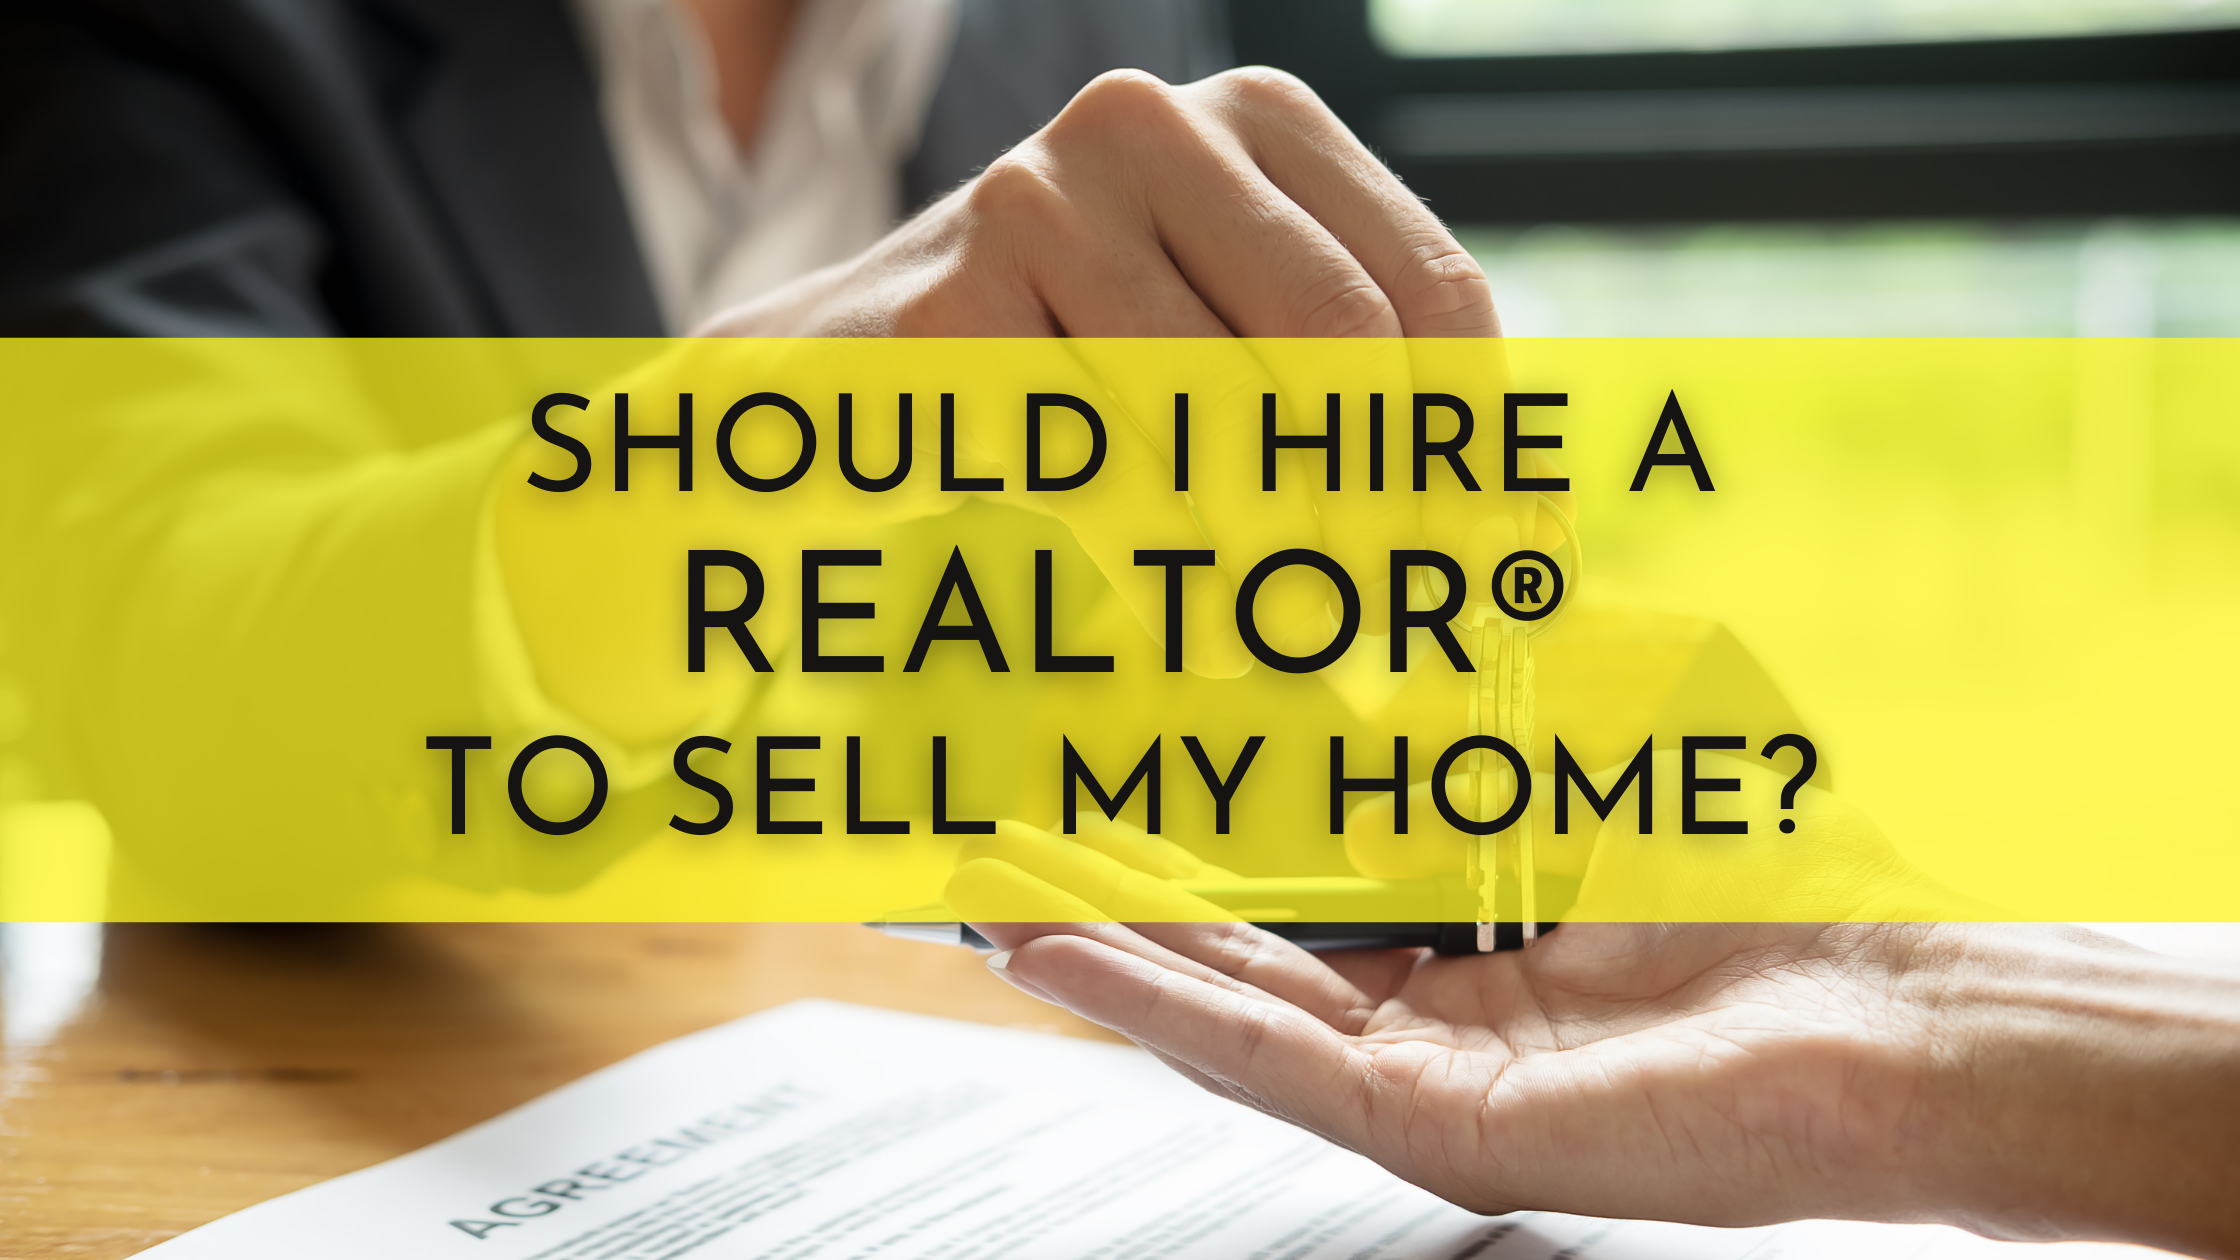 Should I Hire a Realtor® to Sell My Home?